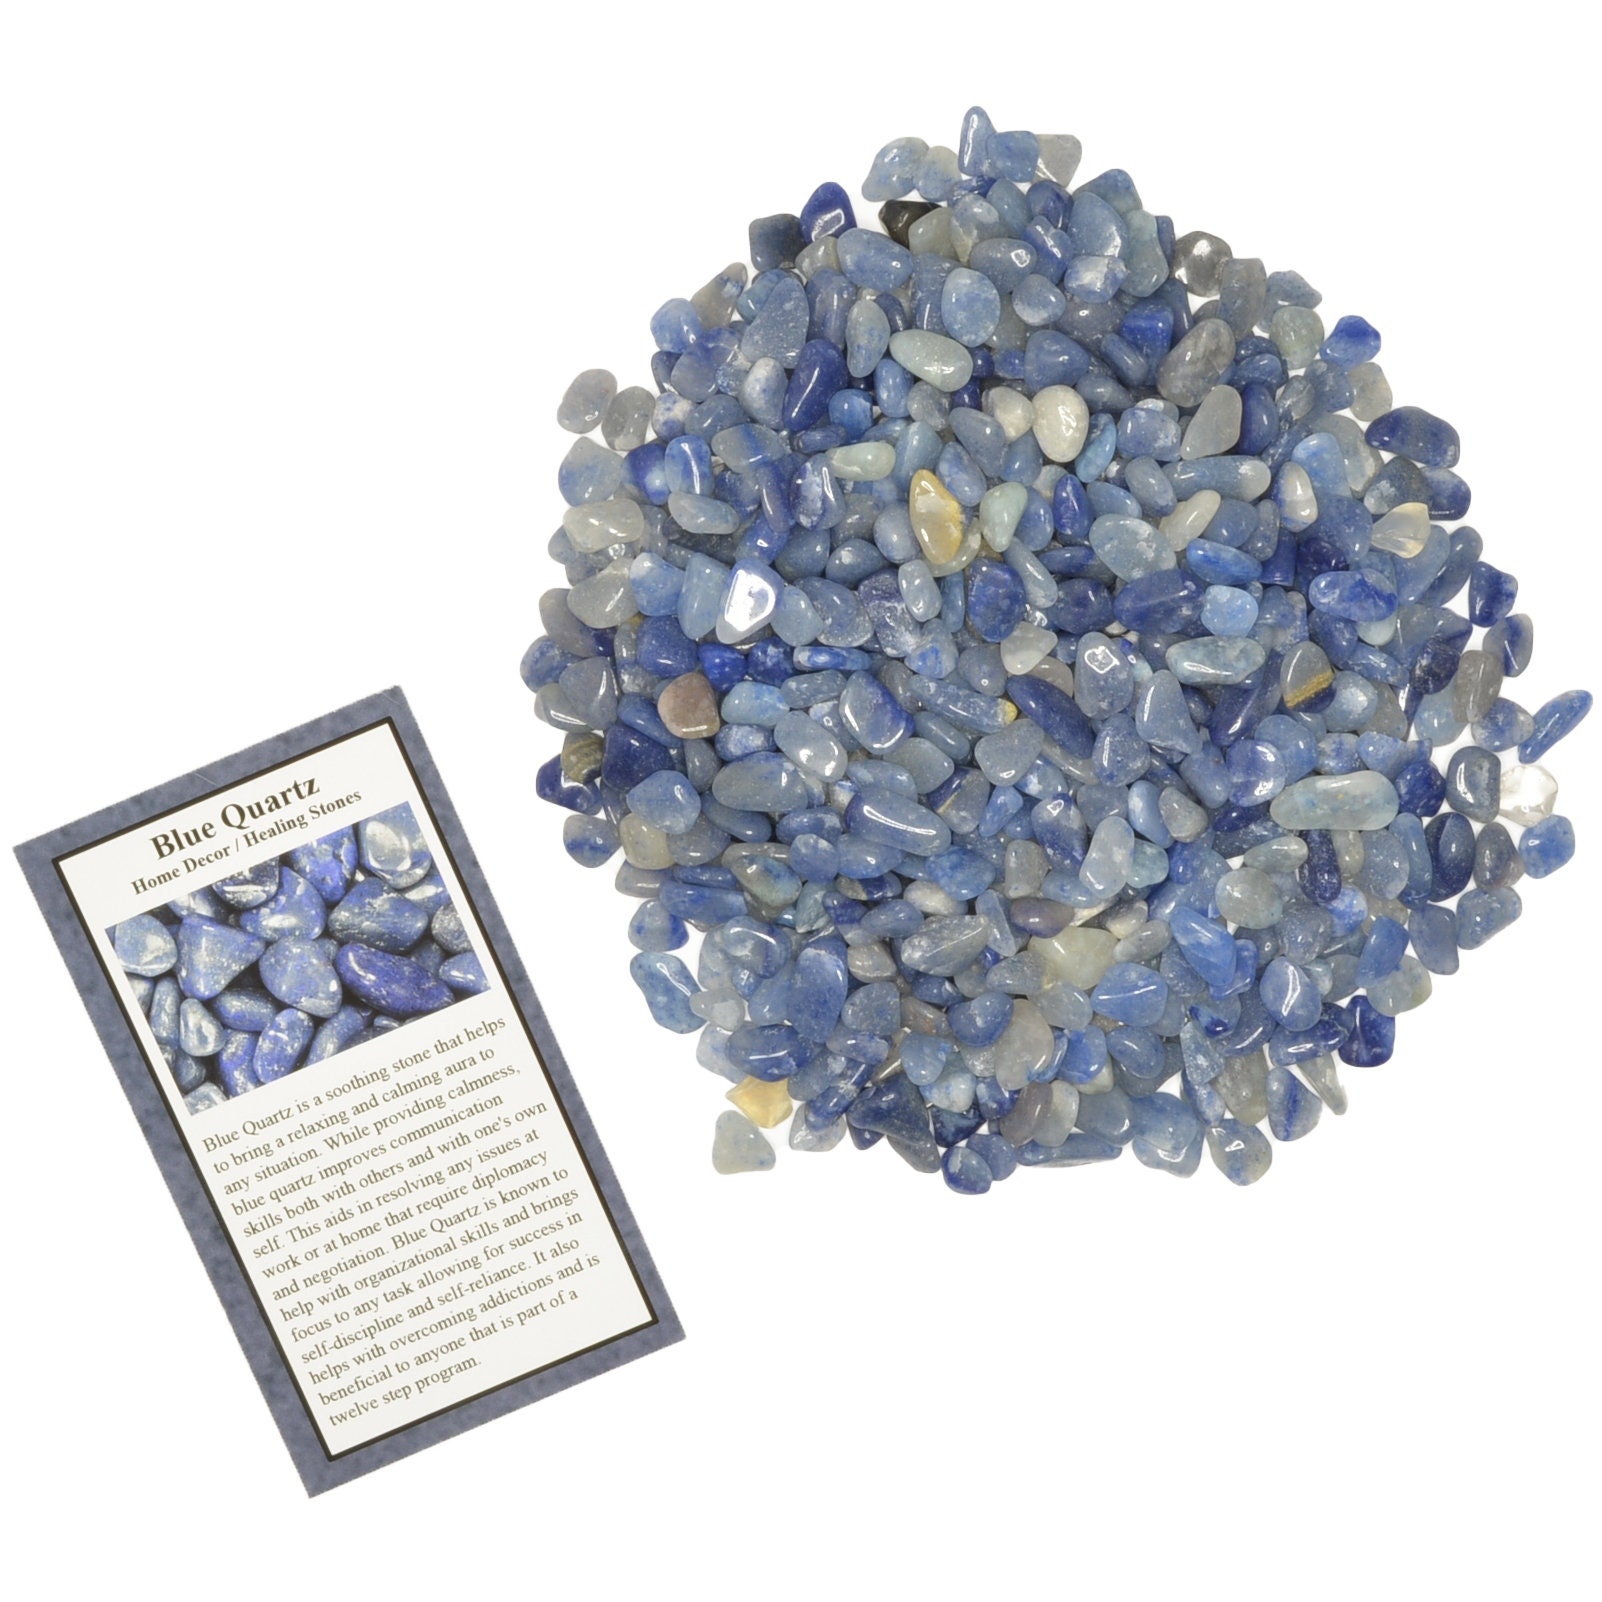 Crafts Natural Earth Mined Brazilian Reiki Fantasia Materials: 1 lb Tumbled Blue Quartz Chip Stones with ID Card Jewelry Making Home Decoration and More! Not China Polished Rocks for Art